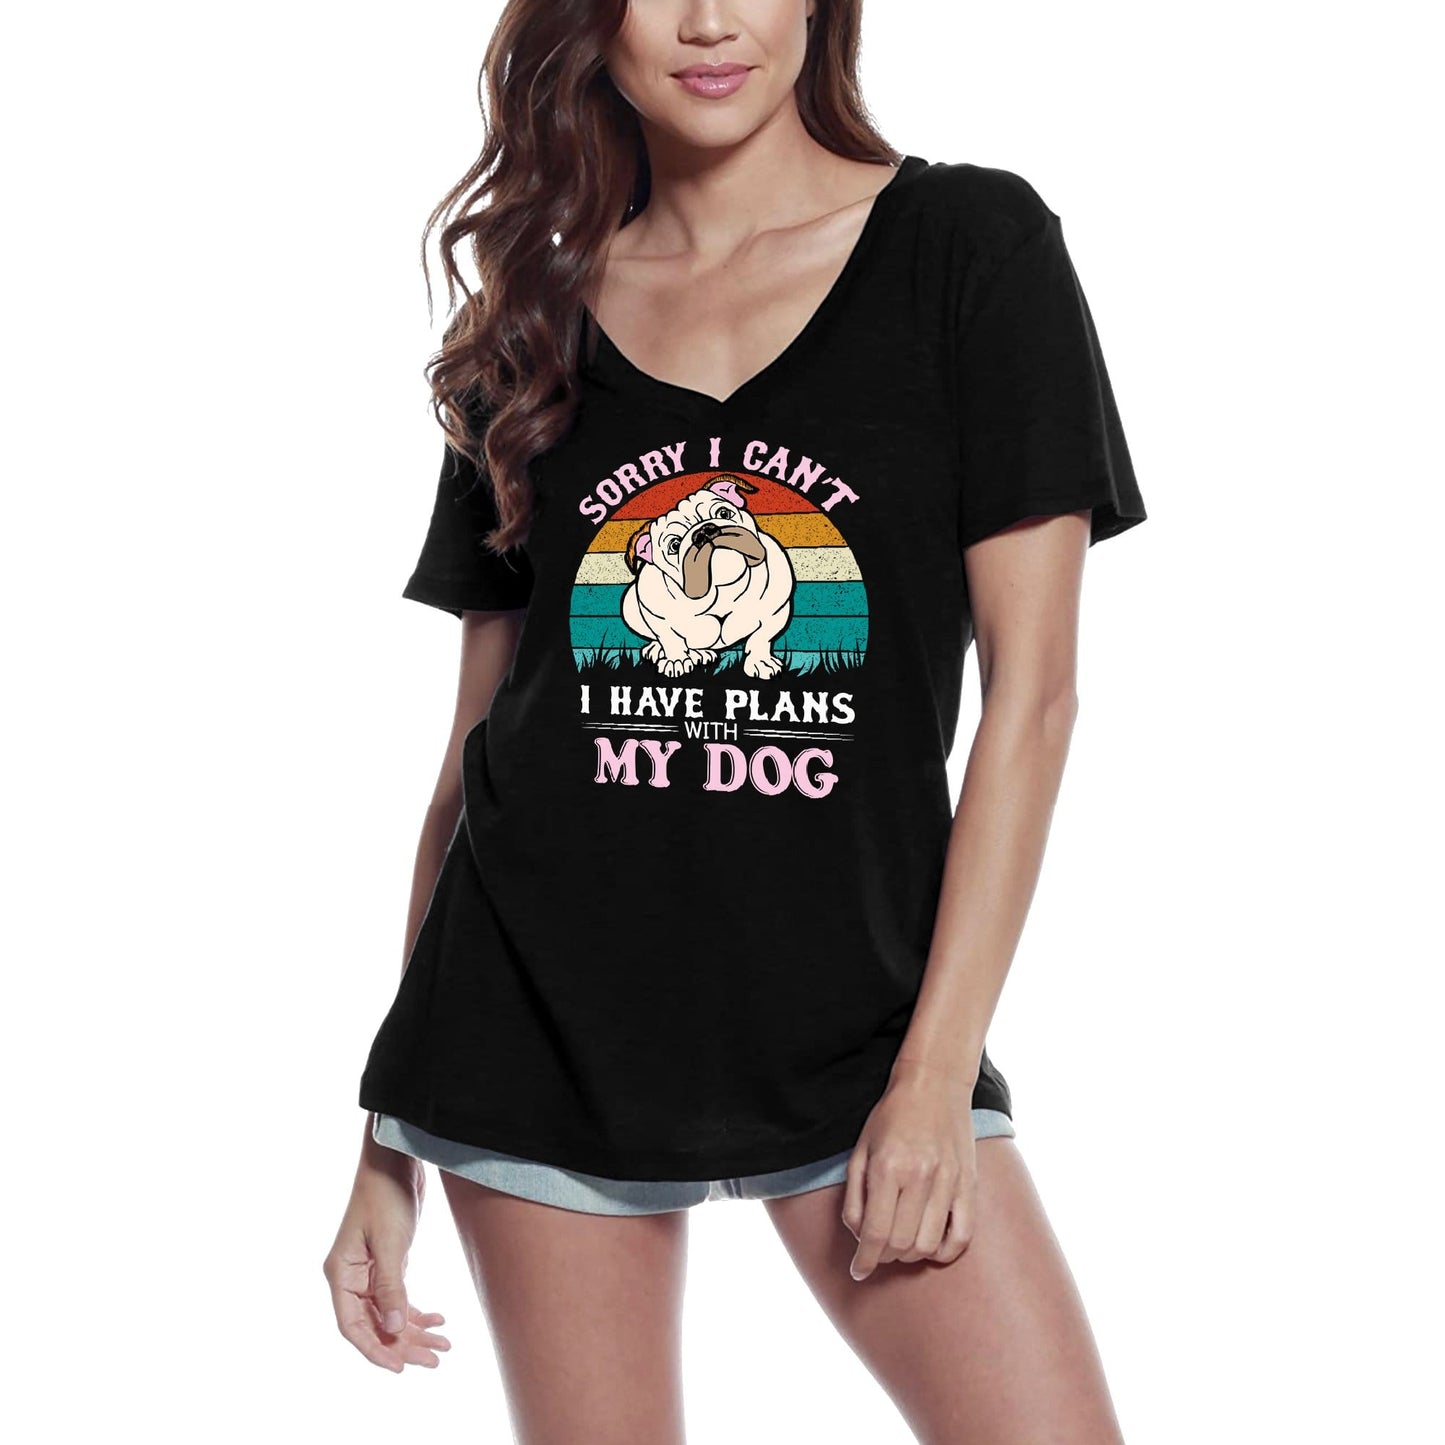 ULTRABASIC Women's T-Shirt Sorry I Can't I Have Plans With My Dog - Funny English Bulldog Tee Shirt